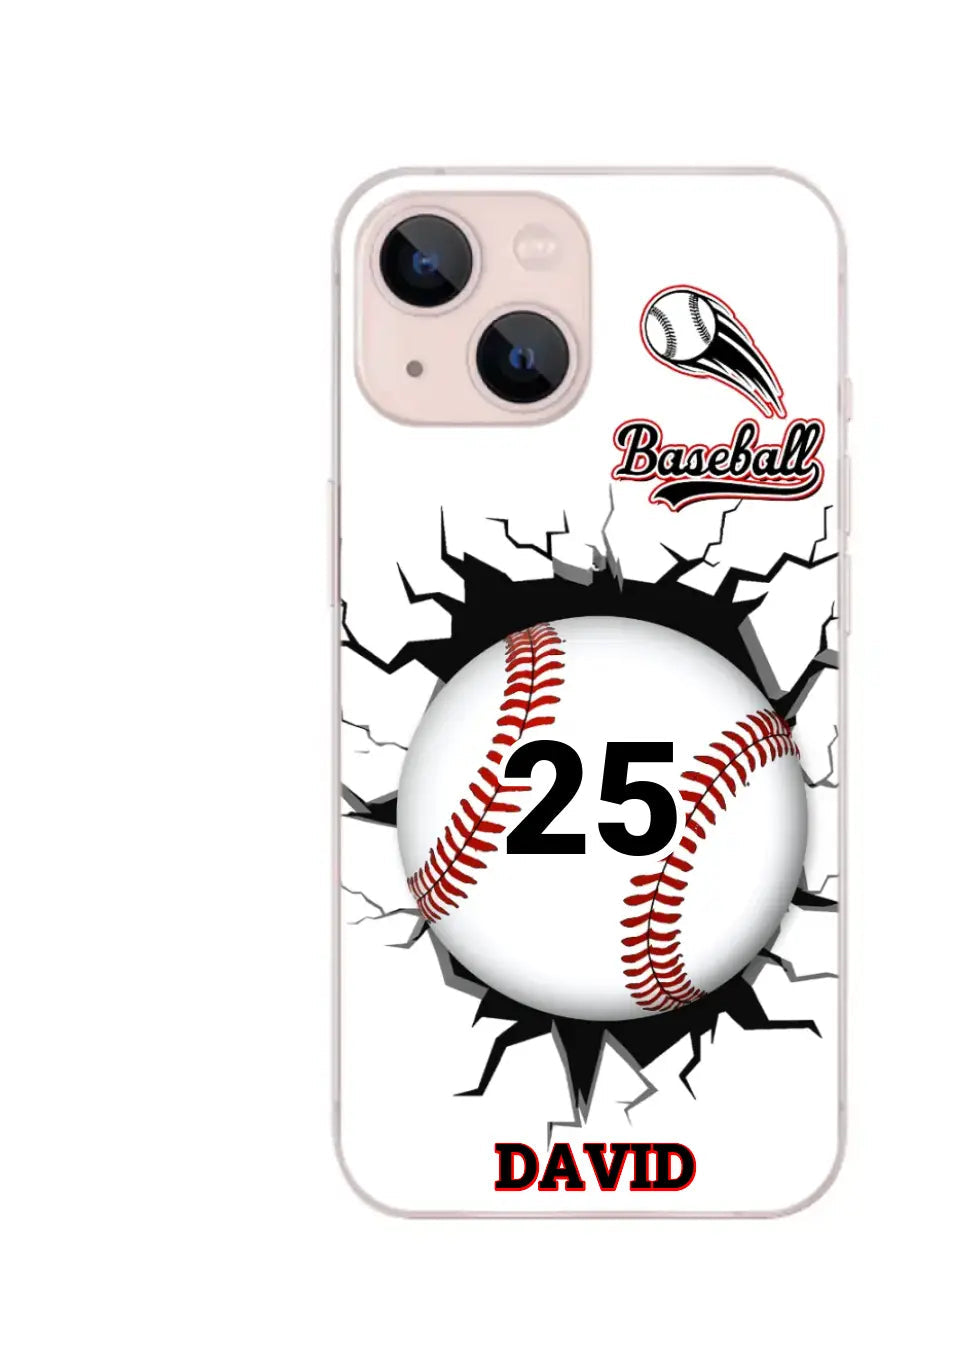 Crack Baseball, Personalized iPhone Case - clear case